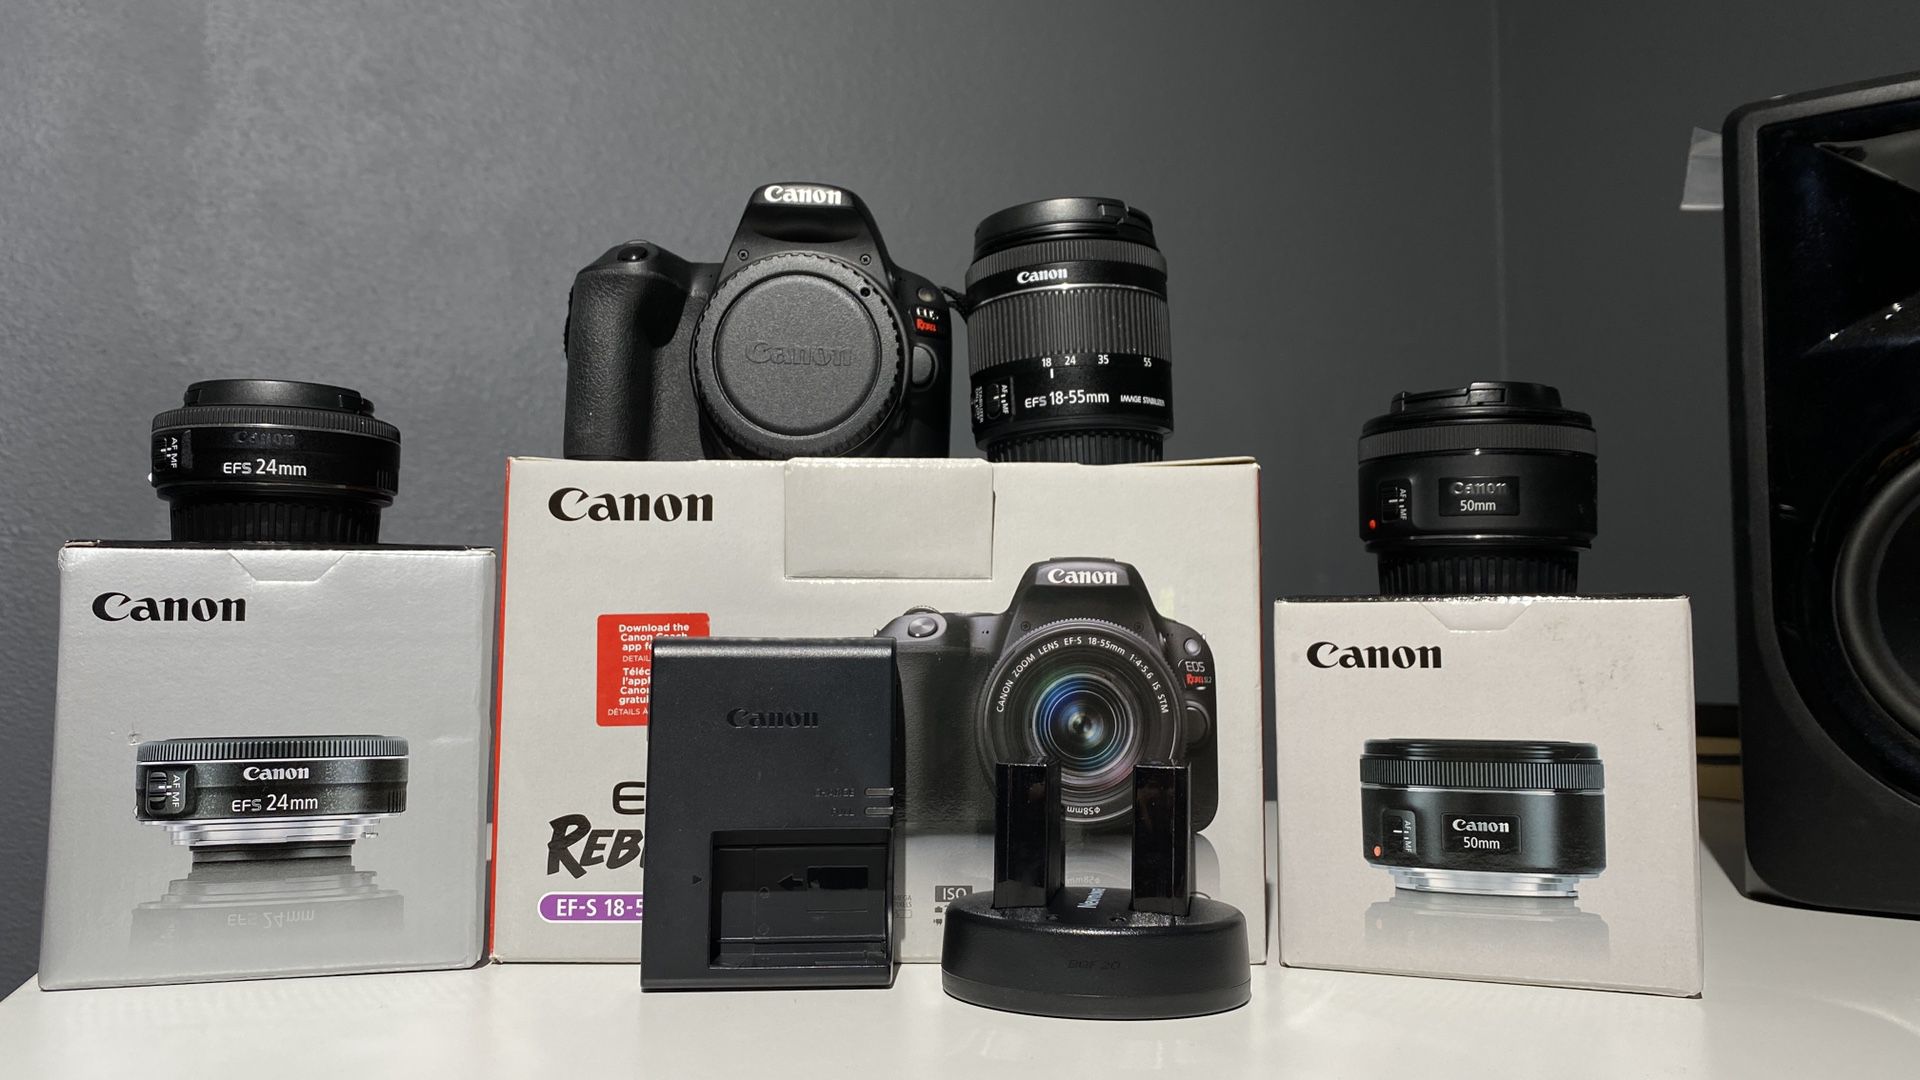 Canon Sl2 with lenses and accessories